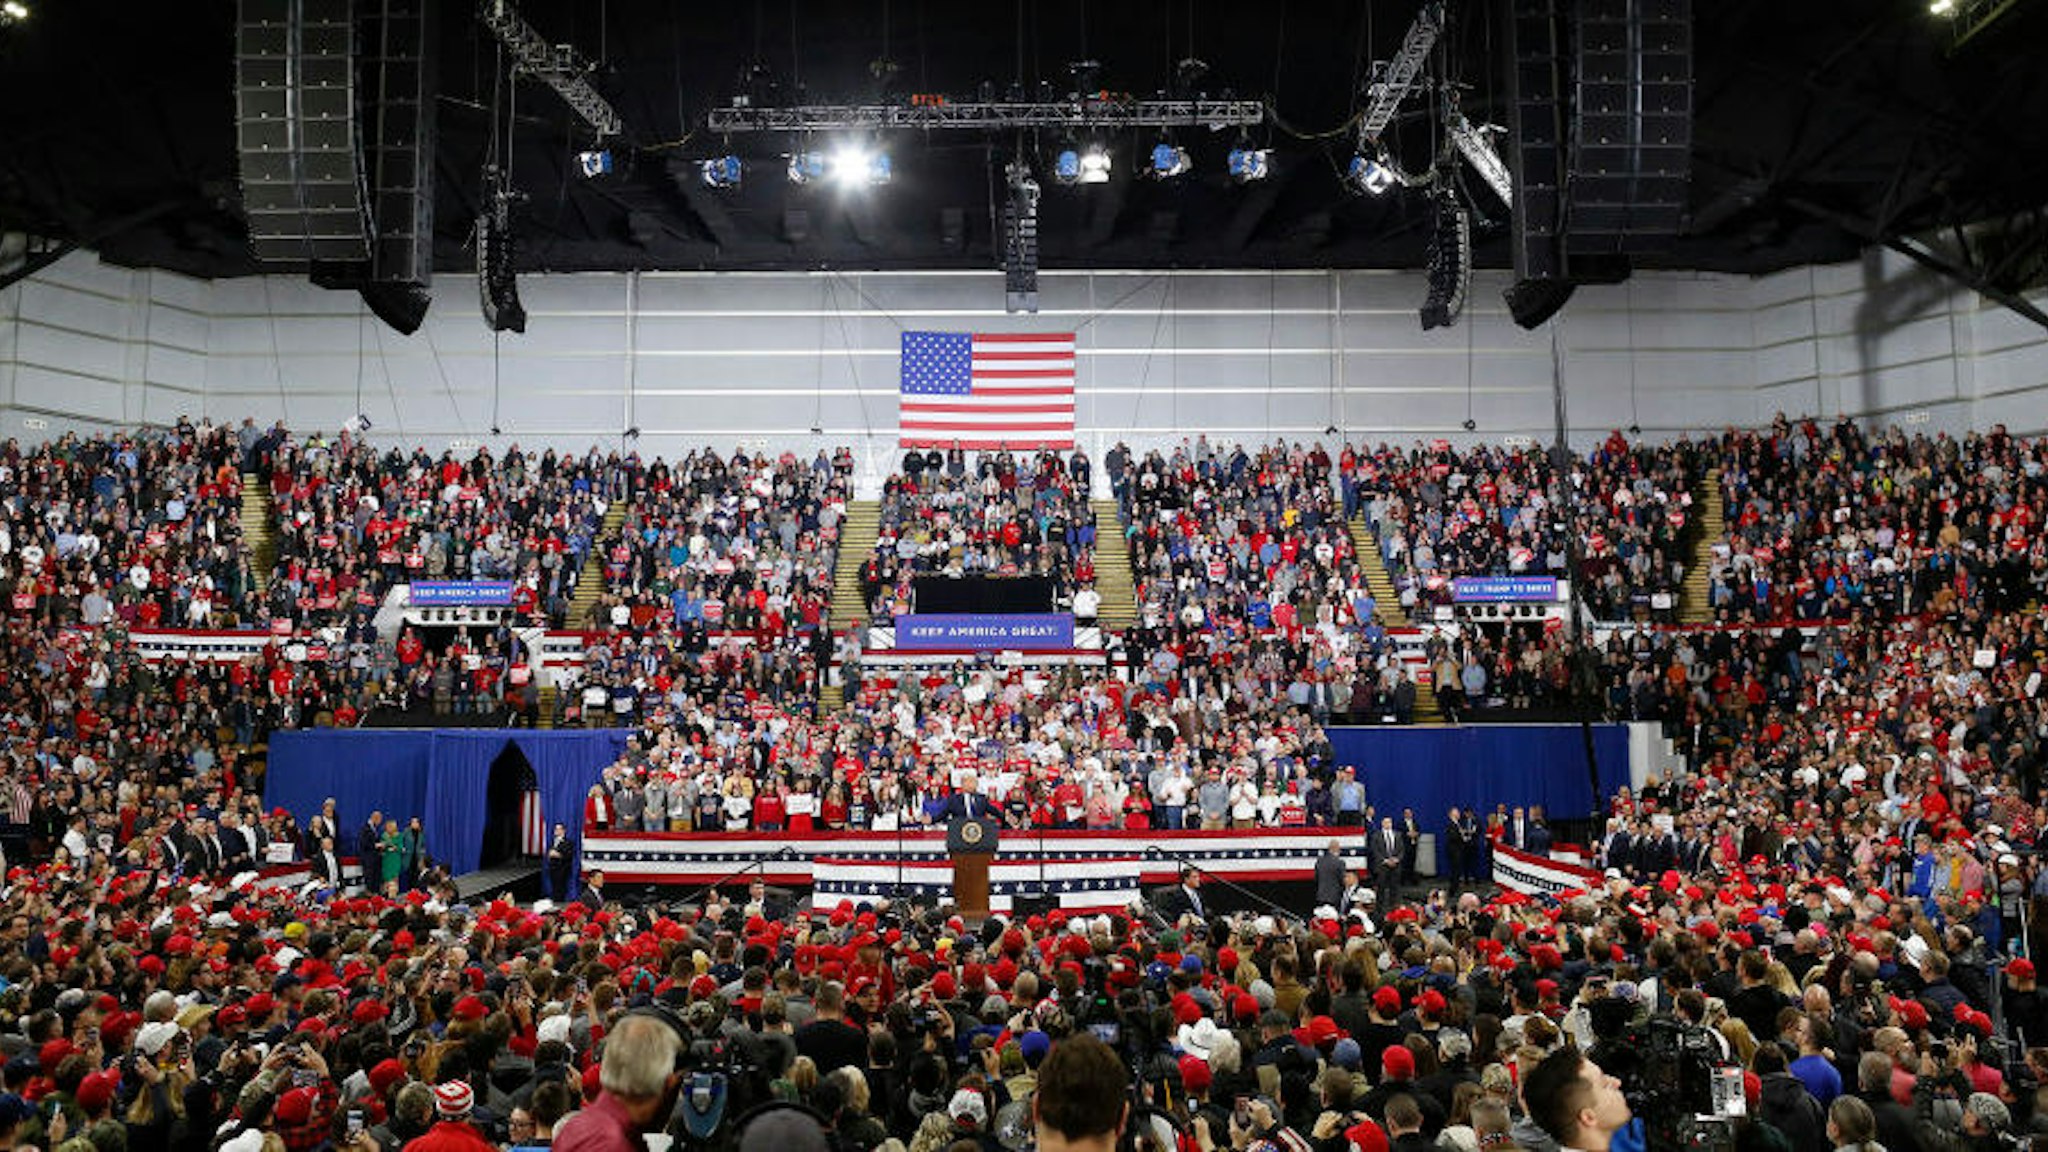 U.S. President Donald Trump speaks during a rally on January 14, 2020 at UWMilwaukee Panther Arena in Milwaukee, Wisconsin. Trump, who is the third president to face impeached, now faces an impending trial in the Senate. (Photo by Joshua Lott/Getty Images)